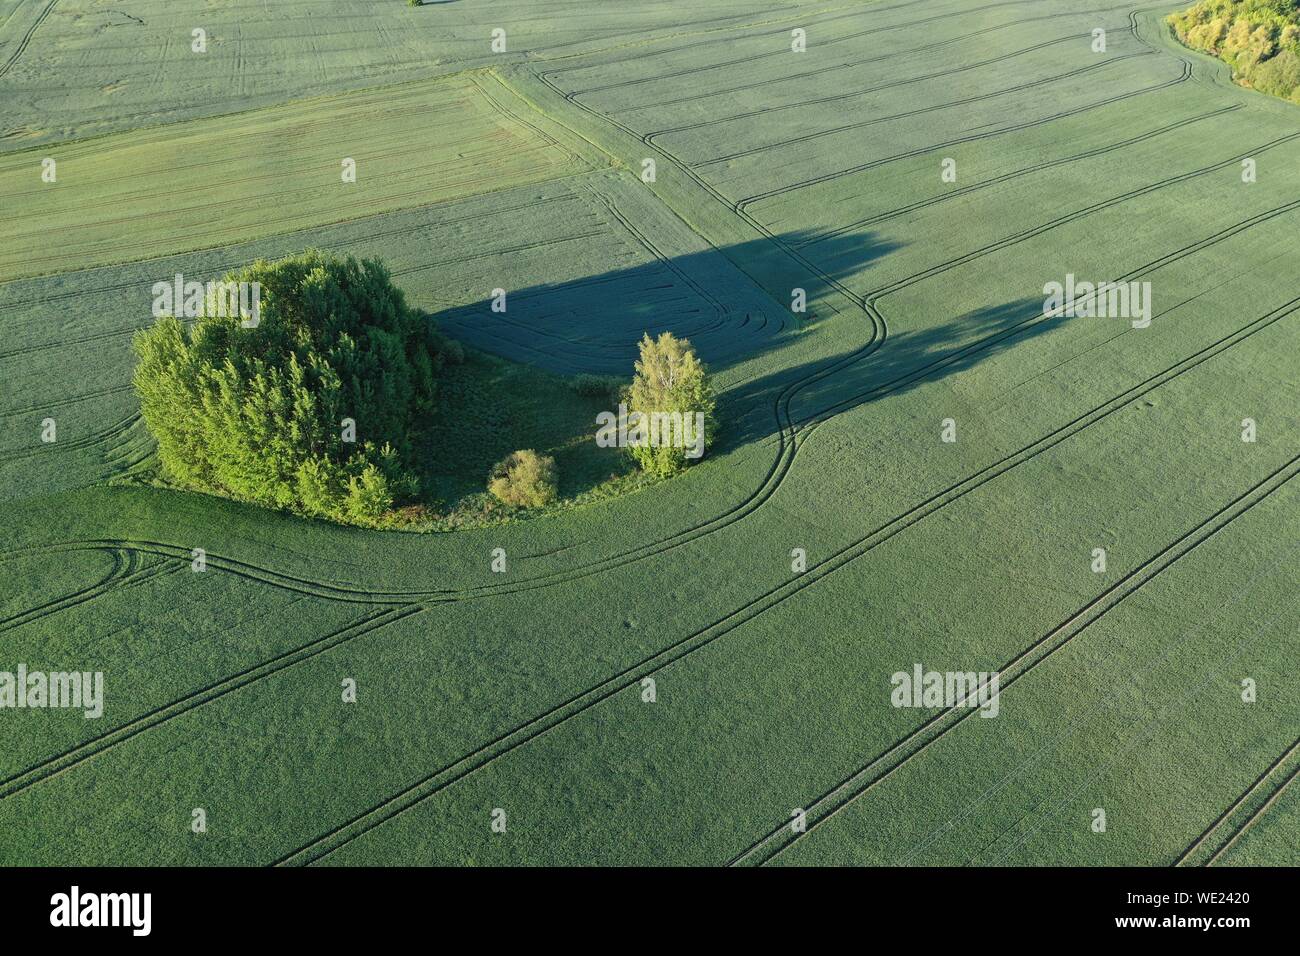 Aerial view of the large green field in spring season Stock Photo